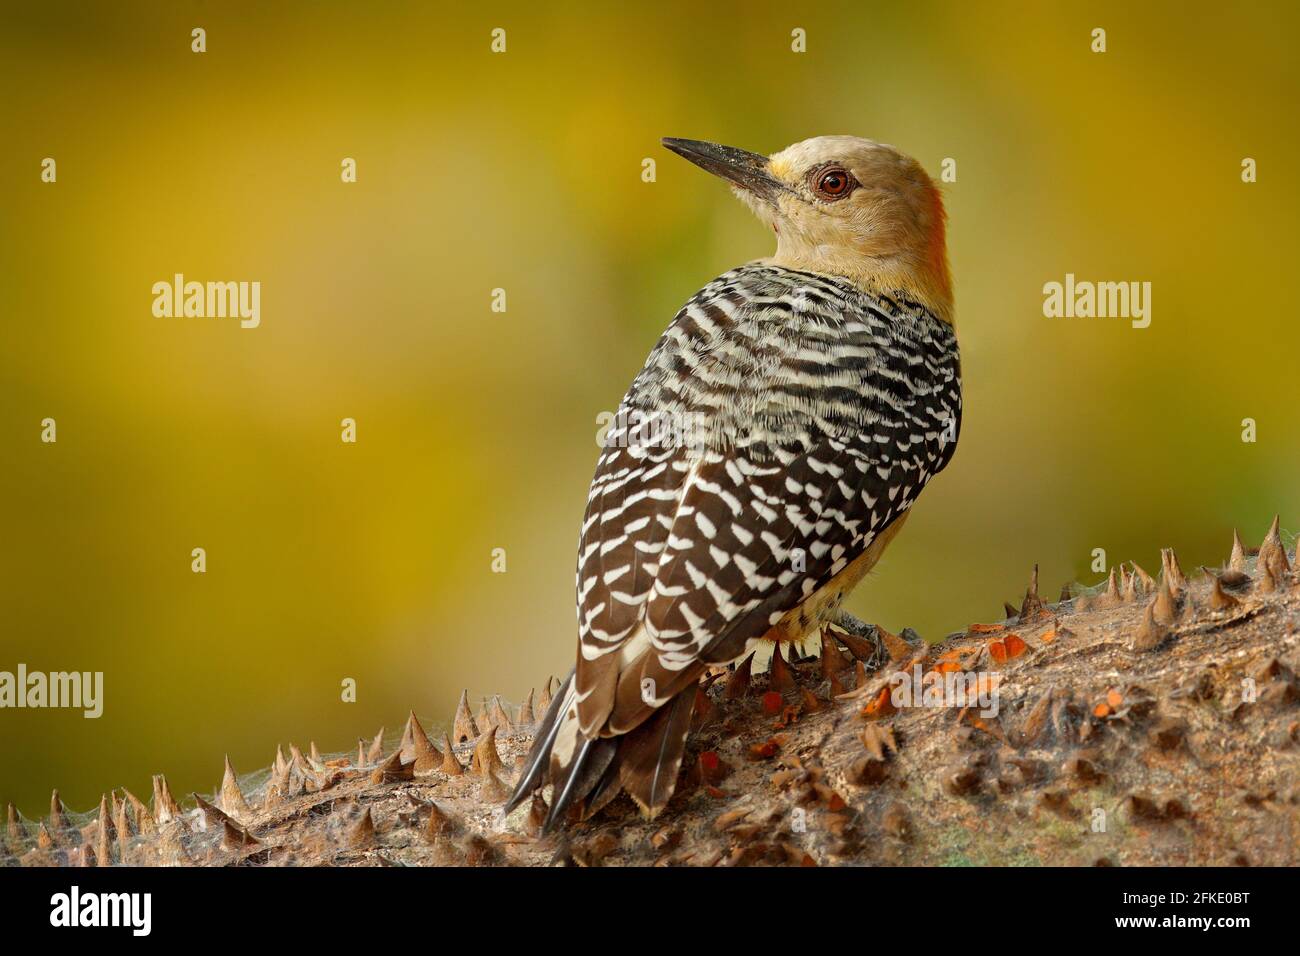 Woodpecker from Costa Rica, Hoffmann's Woodpecker, Melanerpes hoffmanni, sitting on the tree trunk with nesting hole, bird in the nature habitat, Cost Stock Photo